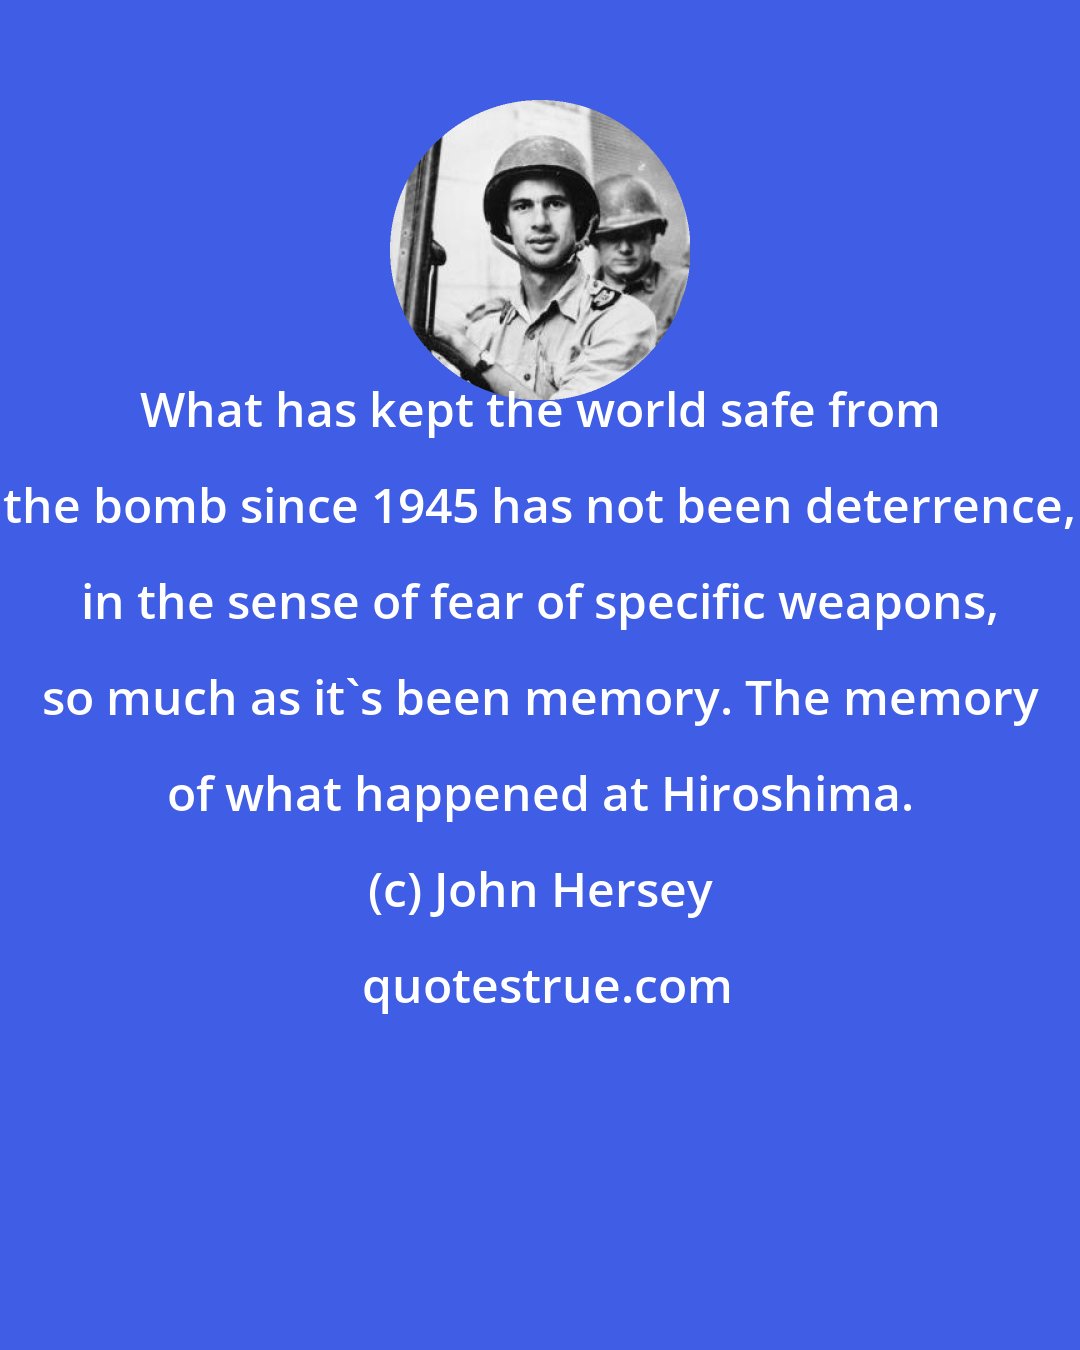 John Hersey: What has kept the world safe from the bomb since 1945 has not been deterrence, in the sense of fear of specific weapons, so much as it's been memory. The memory of what happened at Hiroshima.